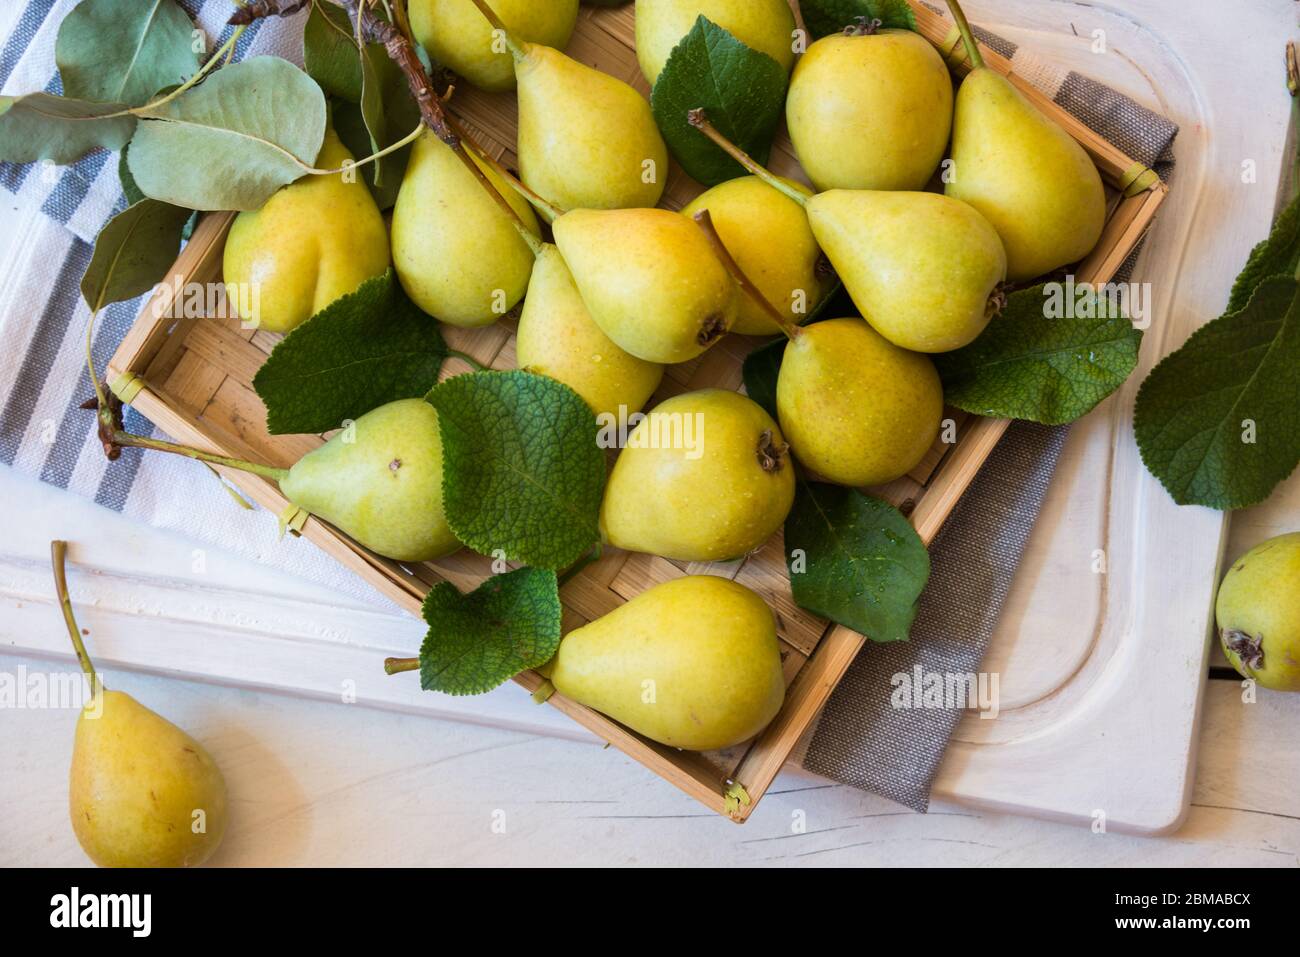 https://c8.alamy.com/comp/2BMABCX/fresh-organic-pears-fruits-with-leaves-on-white-wood-2BMABCX.jpg